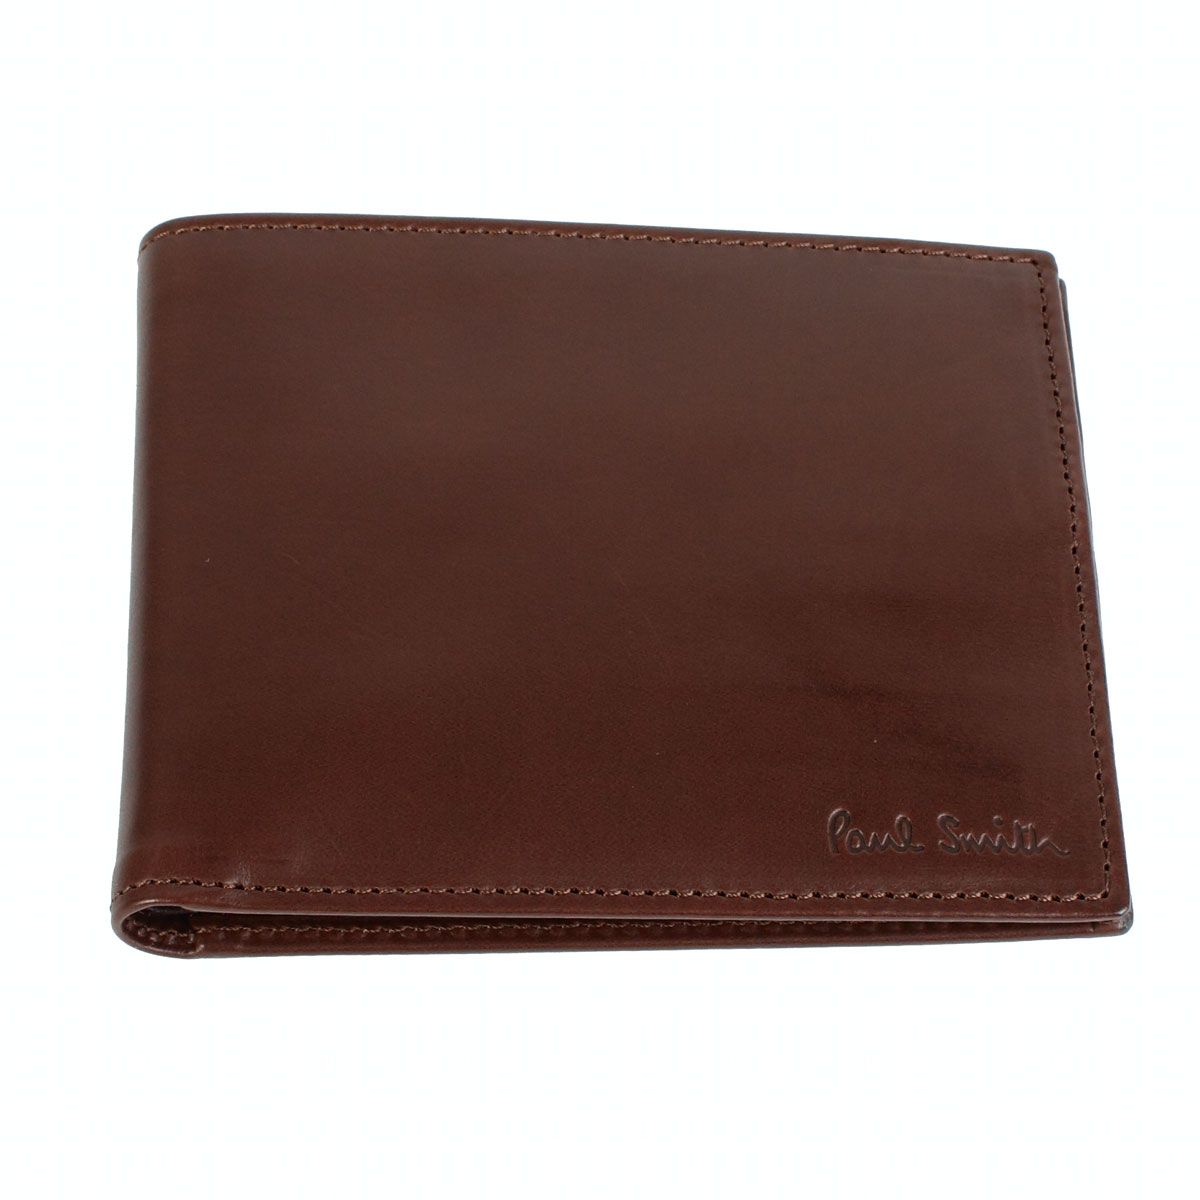 Foto Paul Smith Accessories Brown Leather Wallet foto 67777